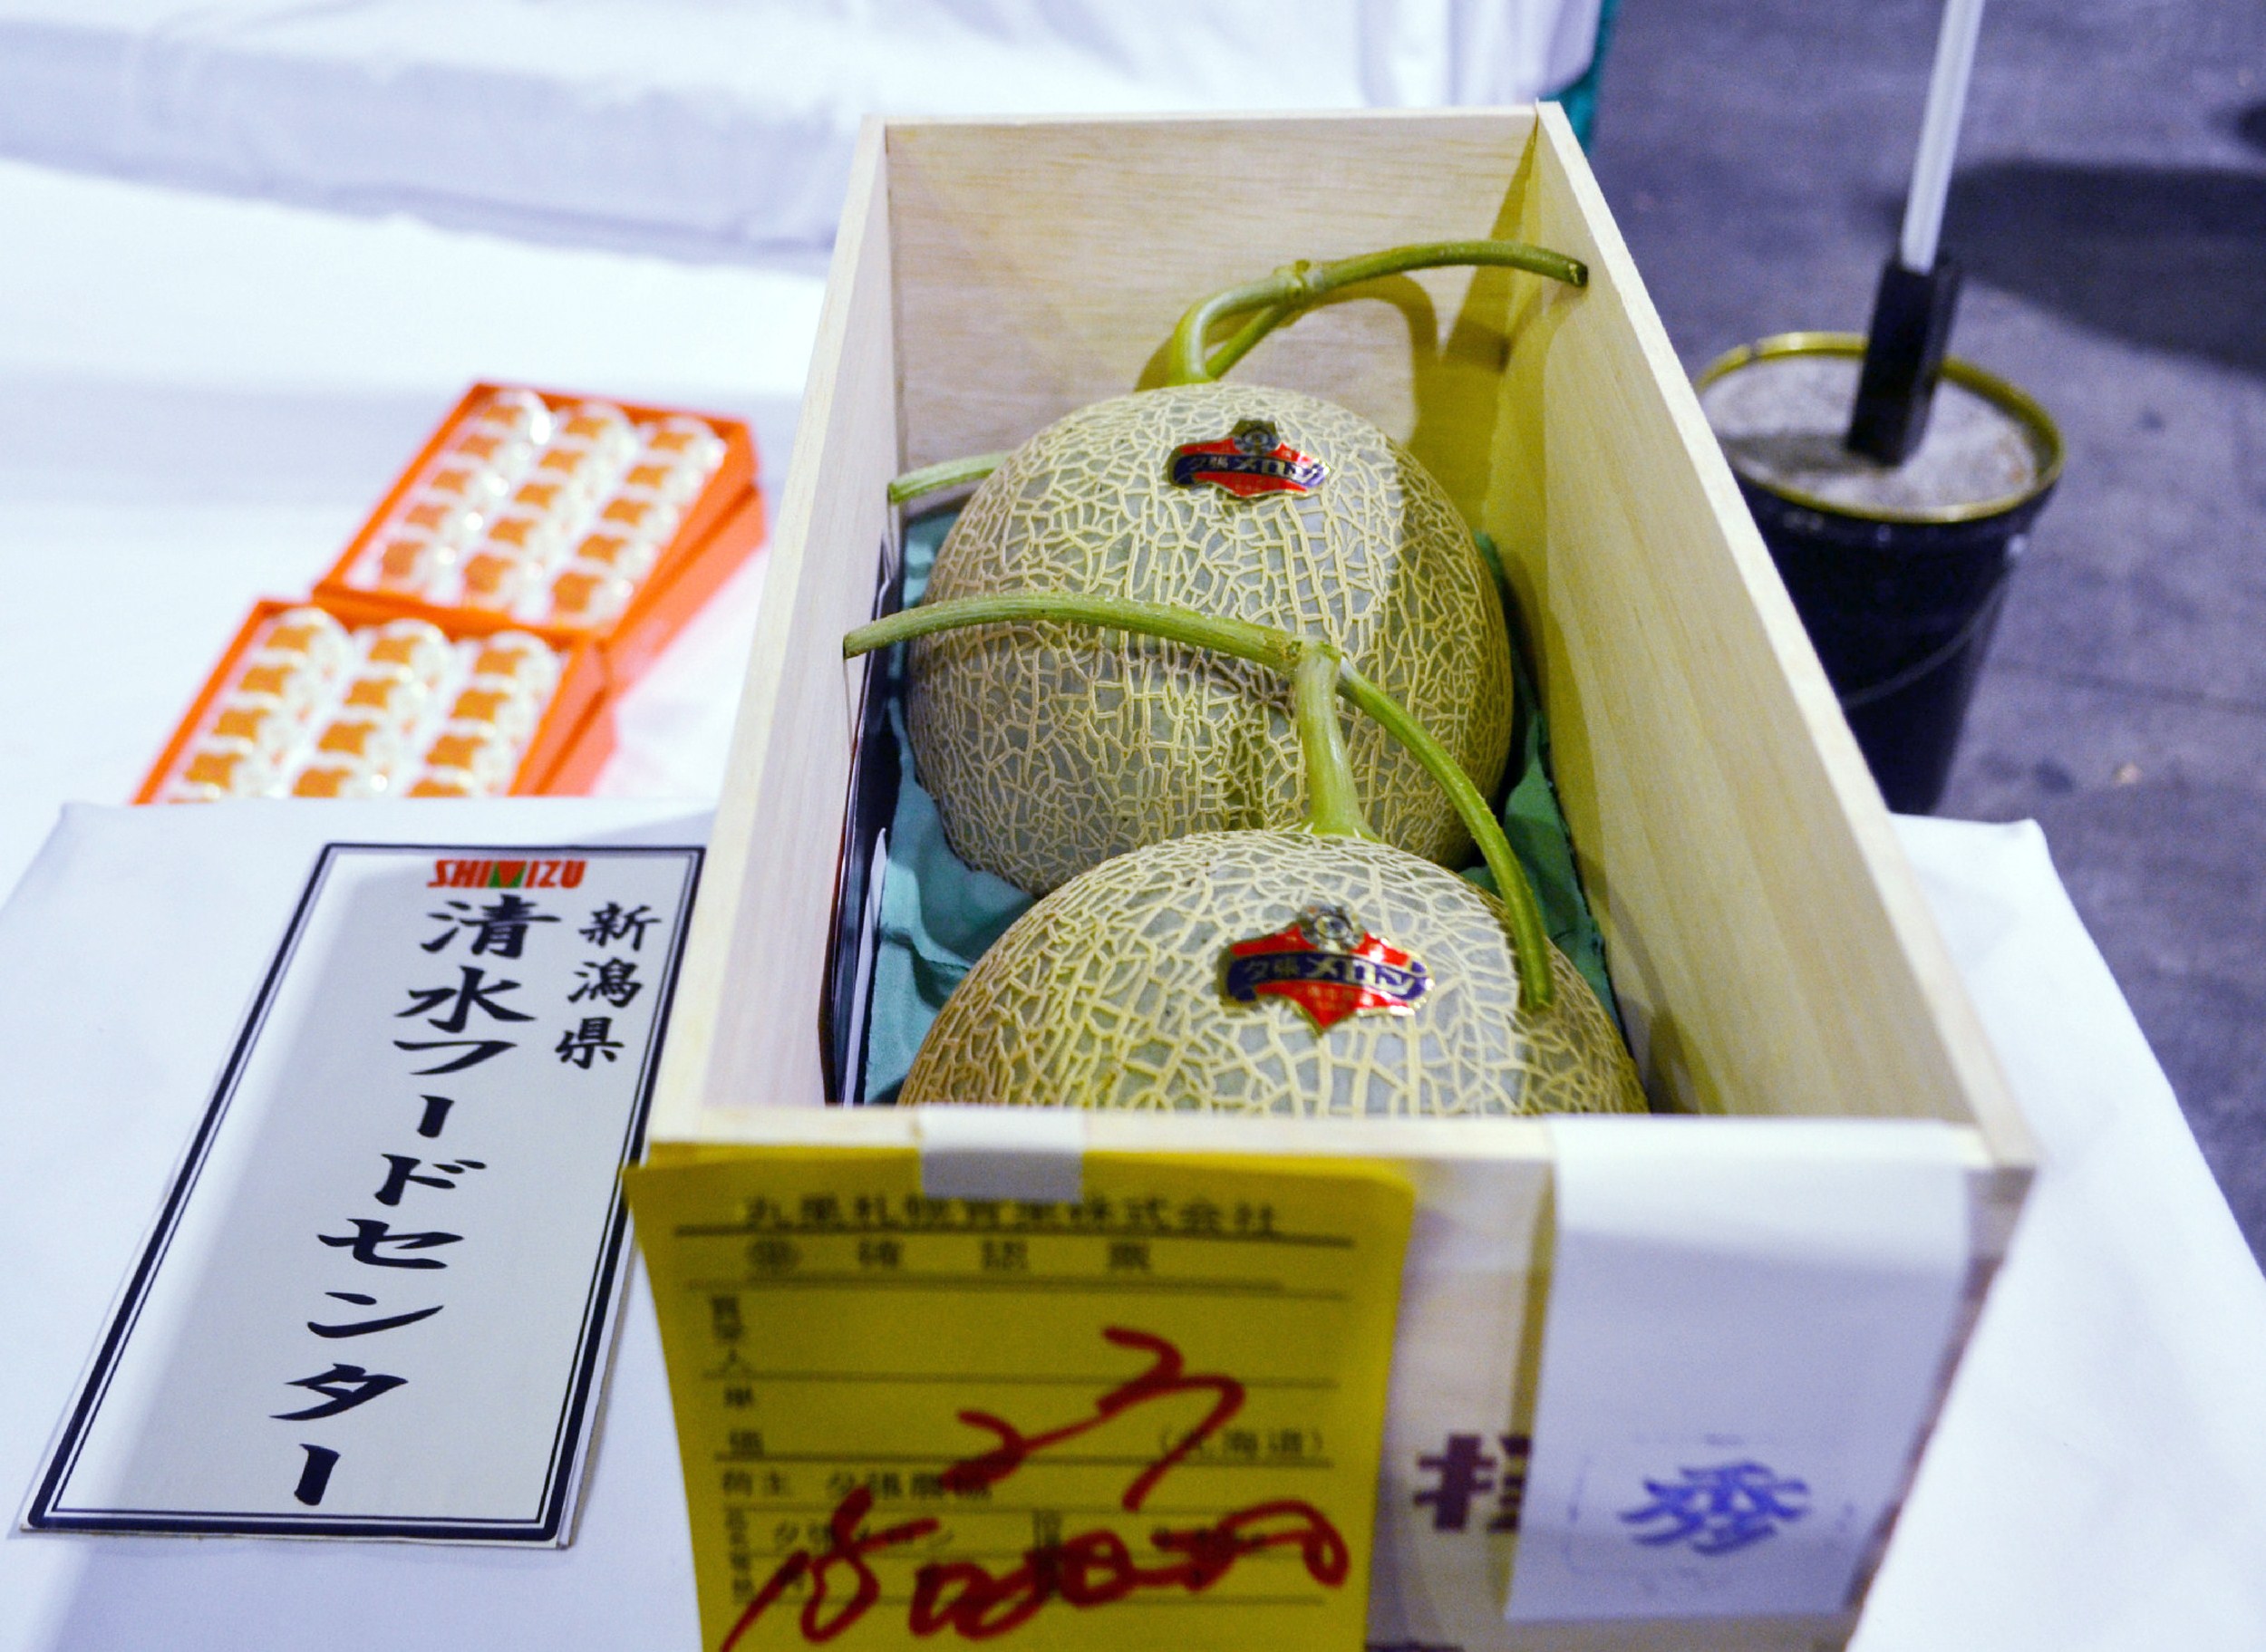 Two Cantaloupes Sold for $27,000 in Japan